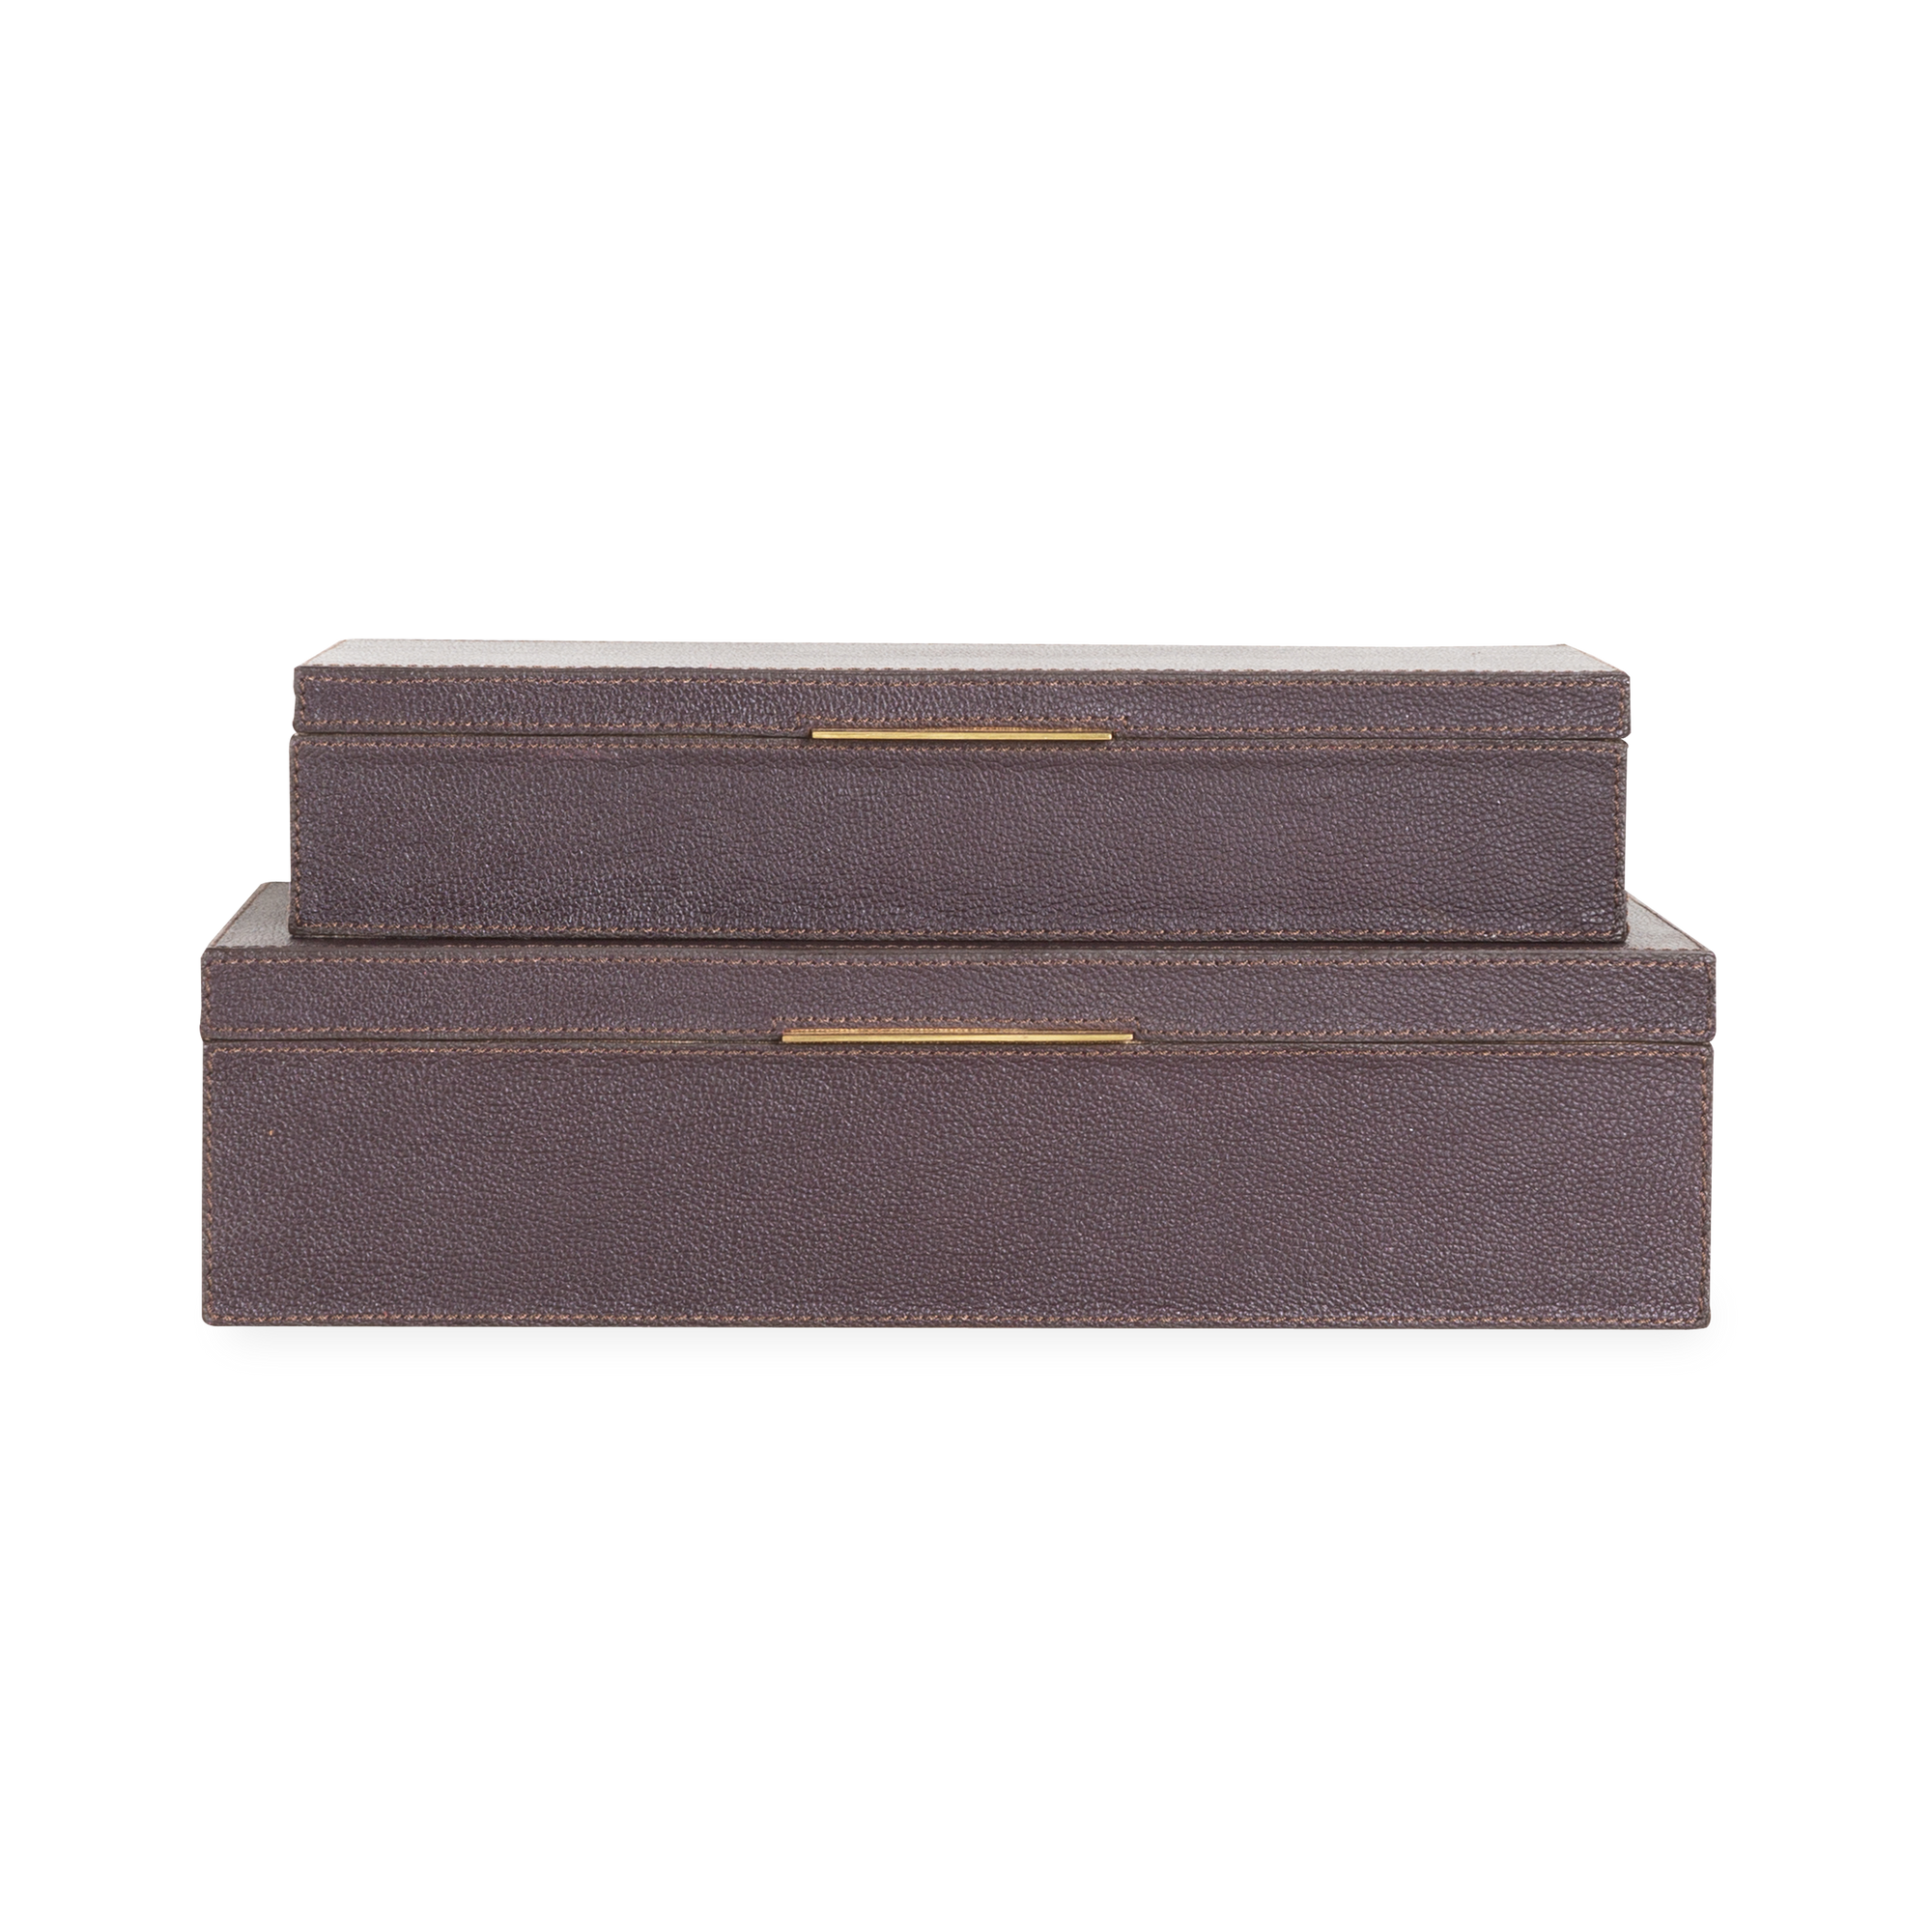 Offering a luxurious aesthetic with its lavish leather exterior and brass detailing, the Ralston Leather Boxes in Aubergine provide an elegant complement to your countertop collect